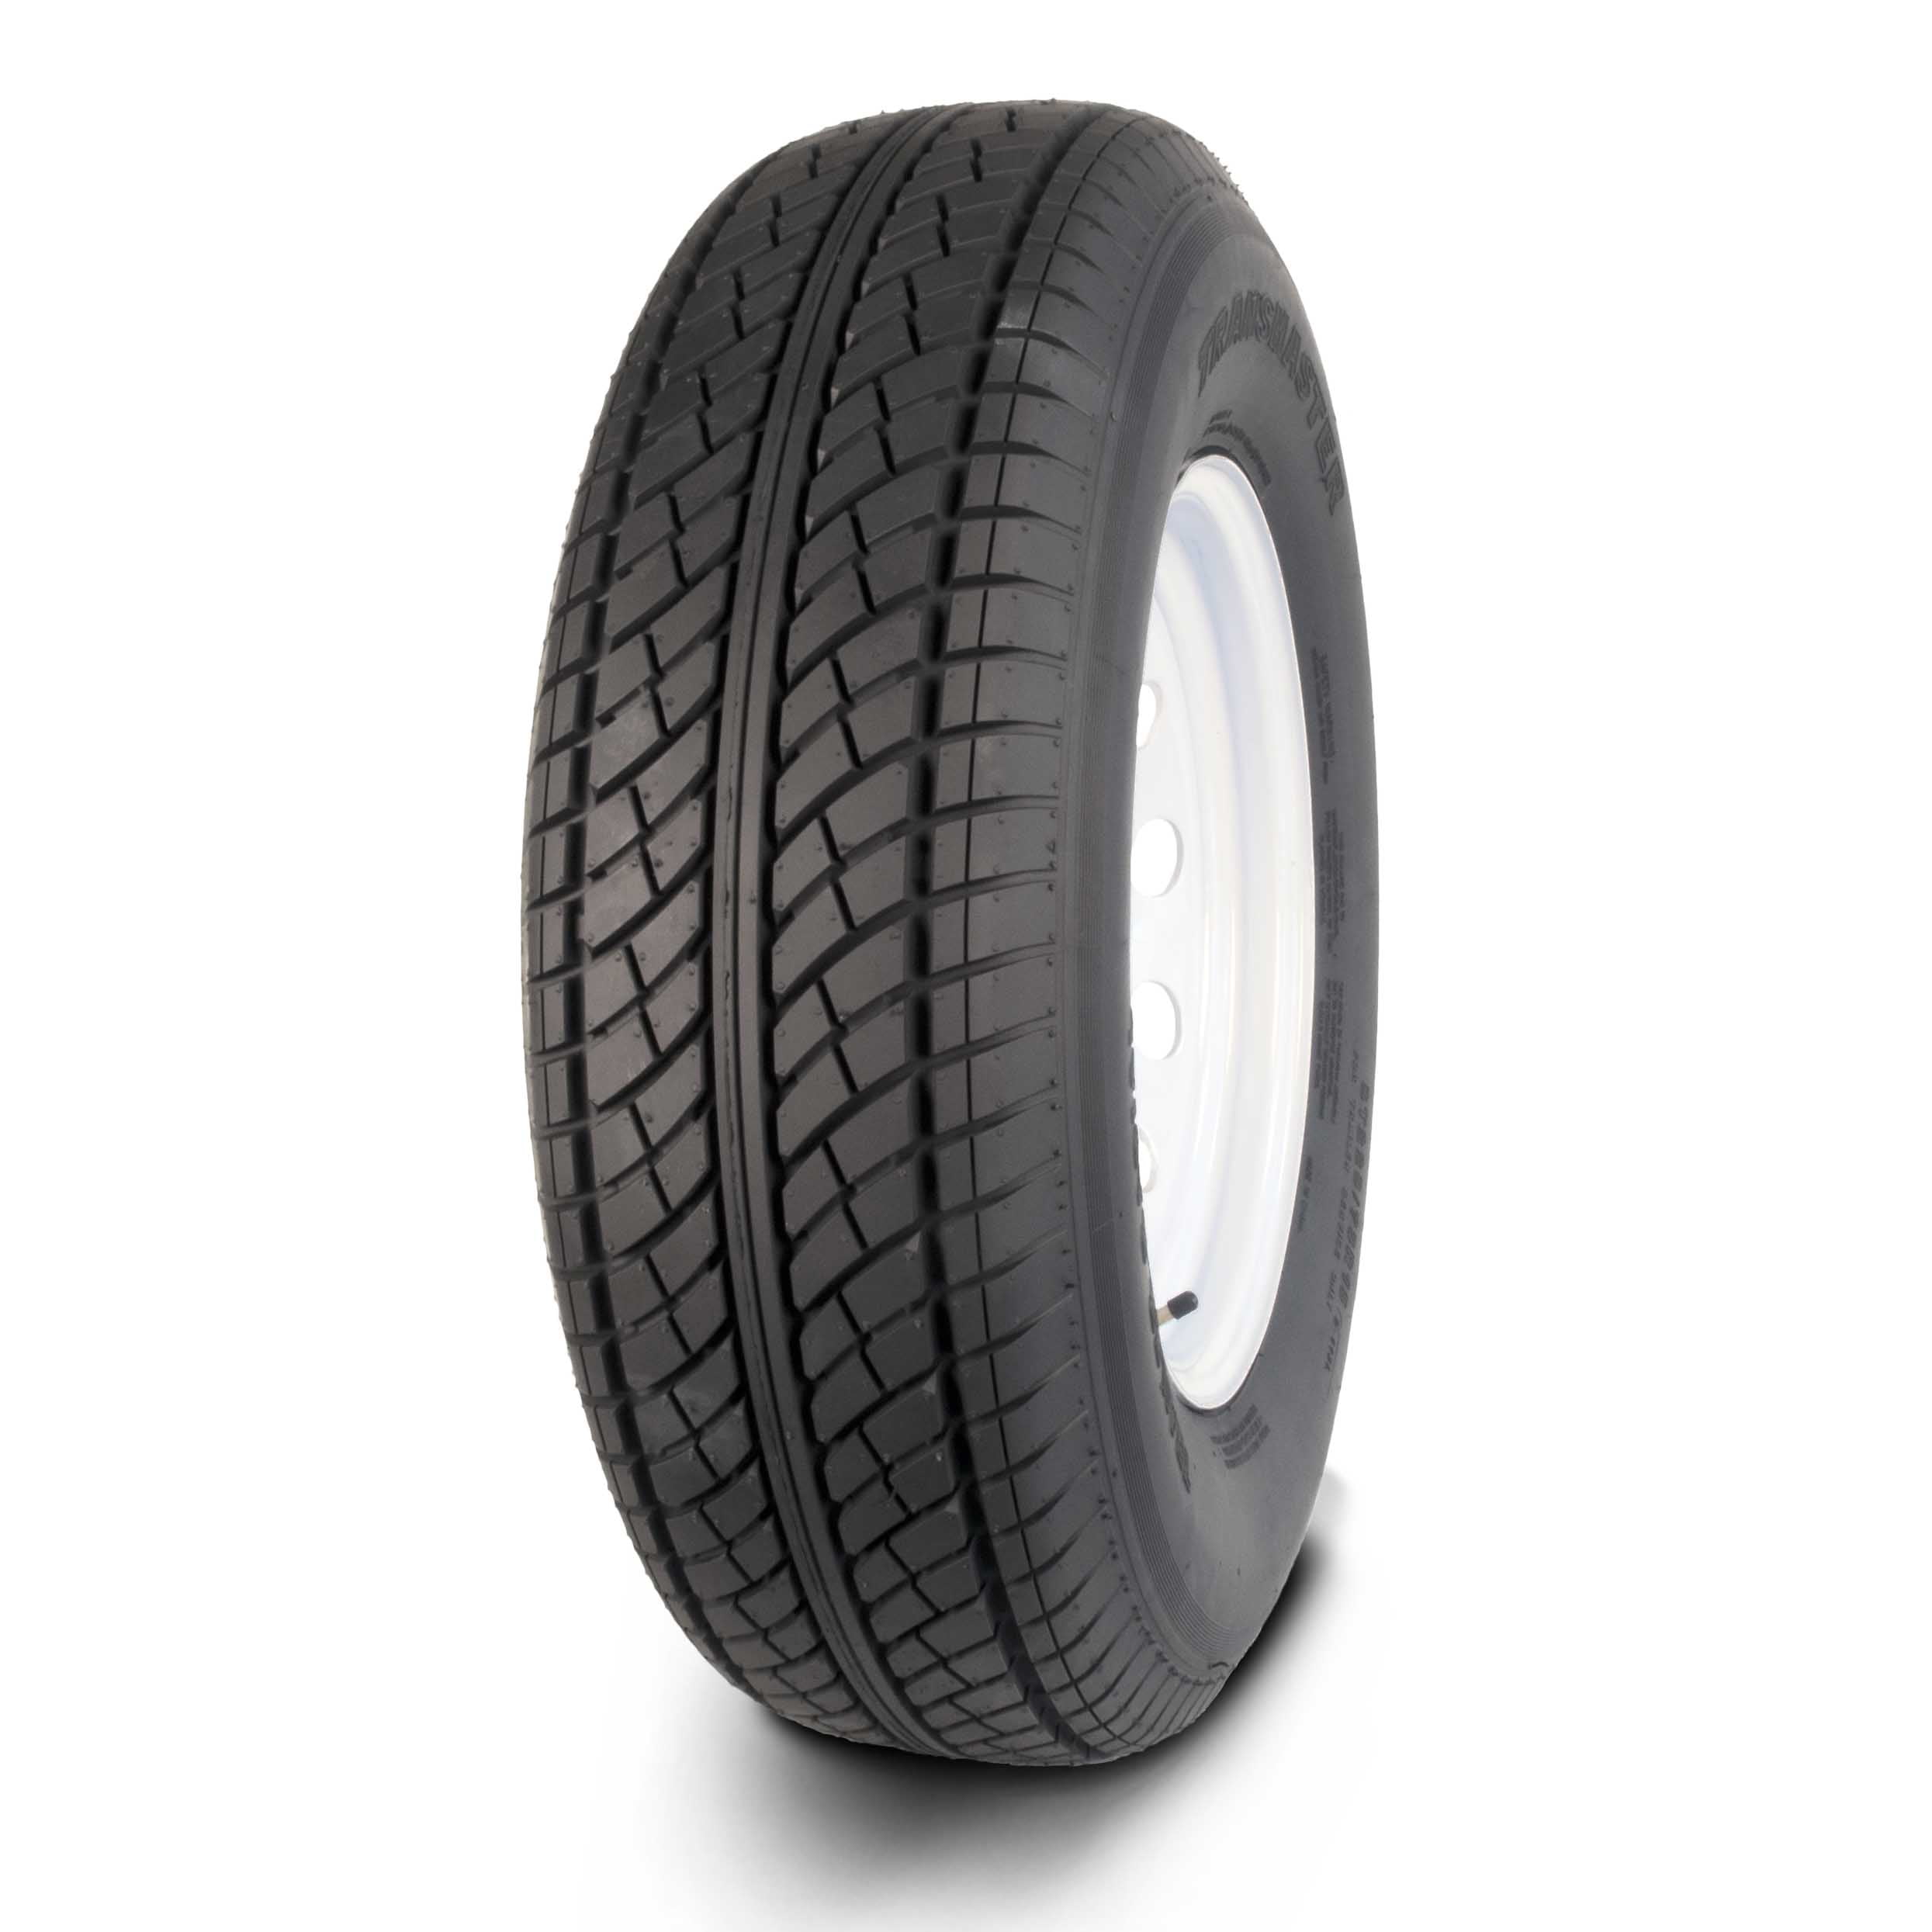 TIRE ONLY NEW Greenball Trailer Tire Transmaster EV ST205/75R15 8 Ply Radial 